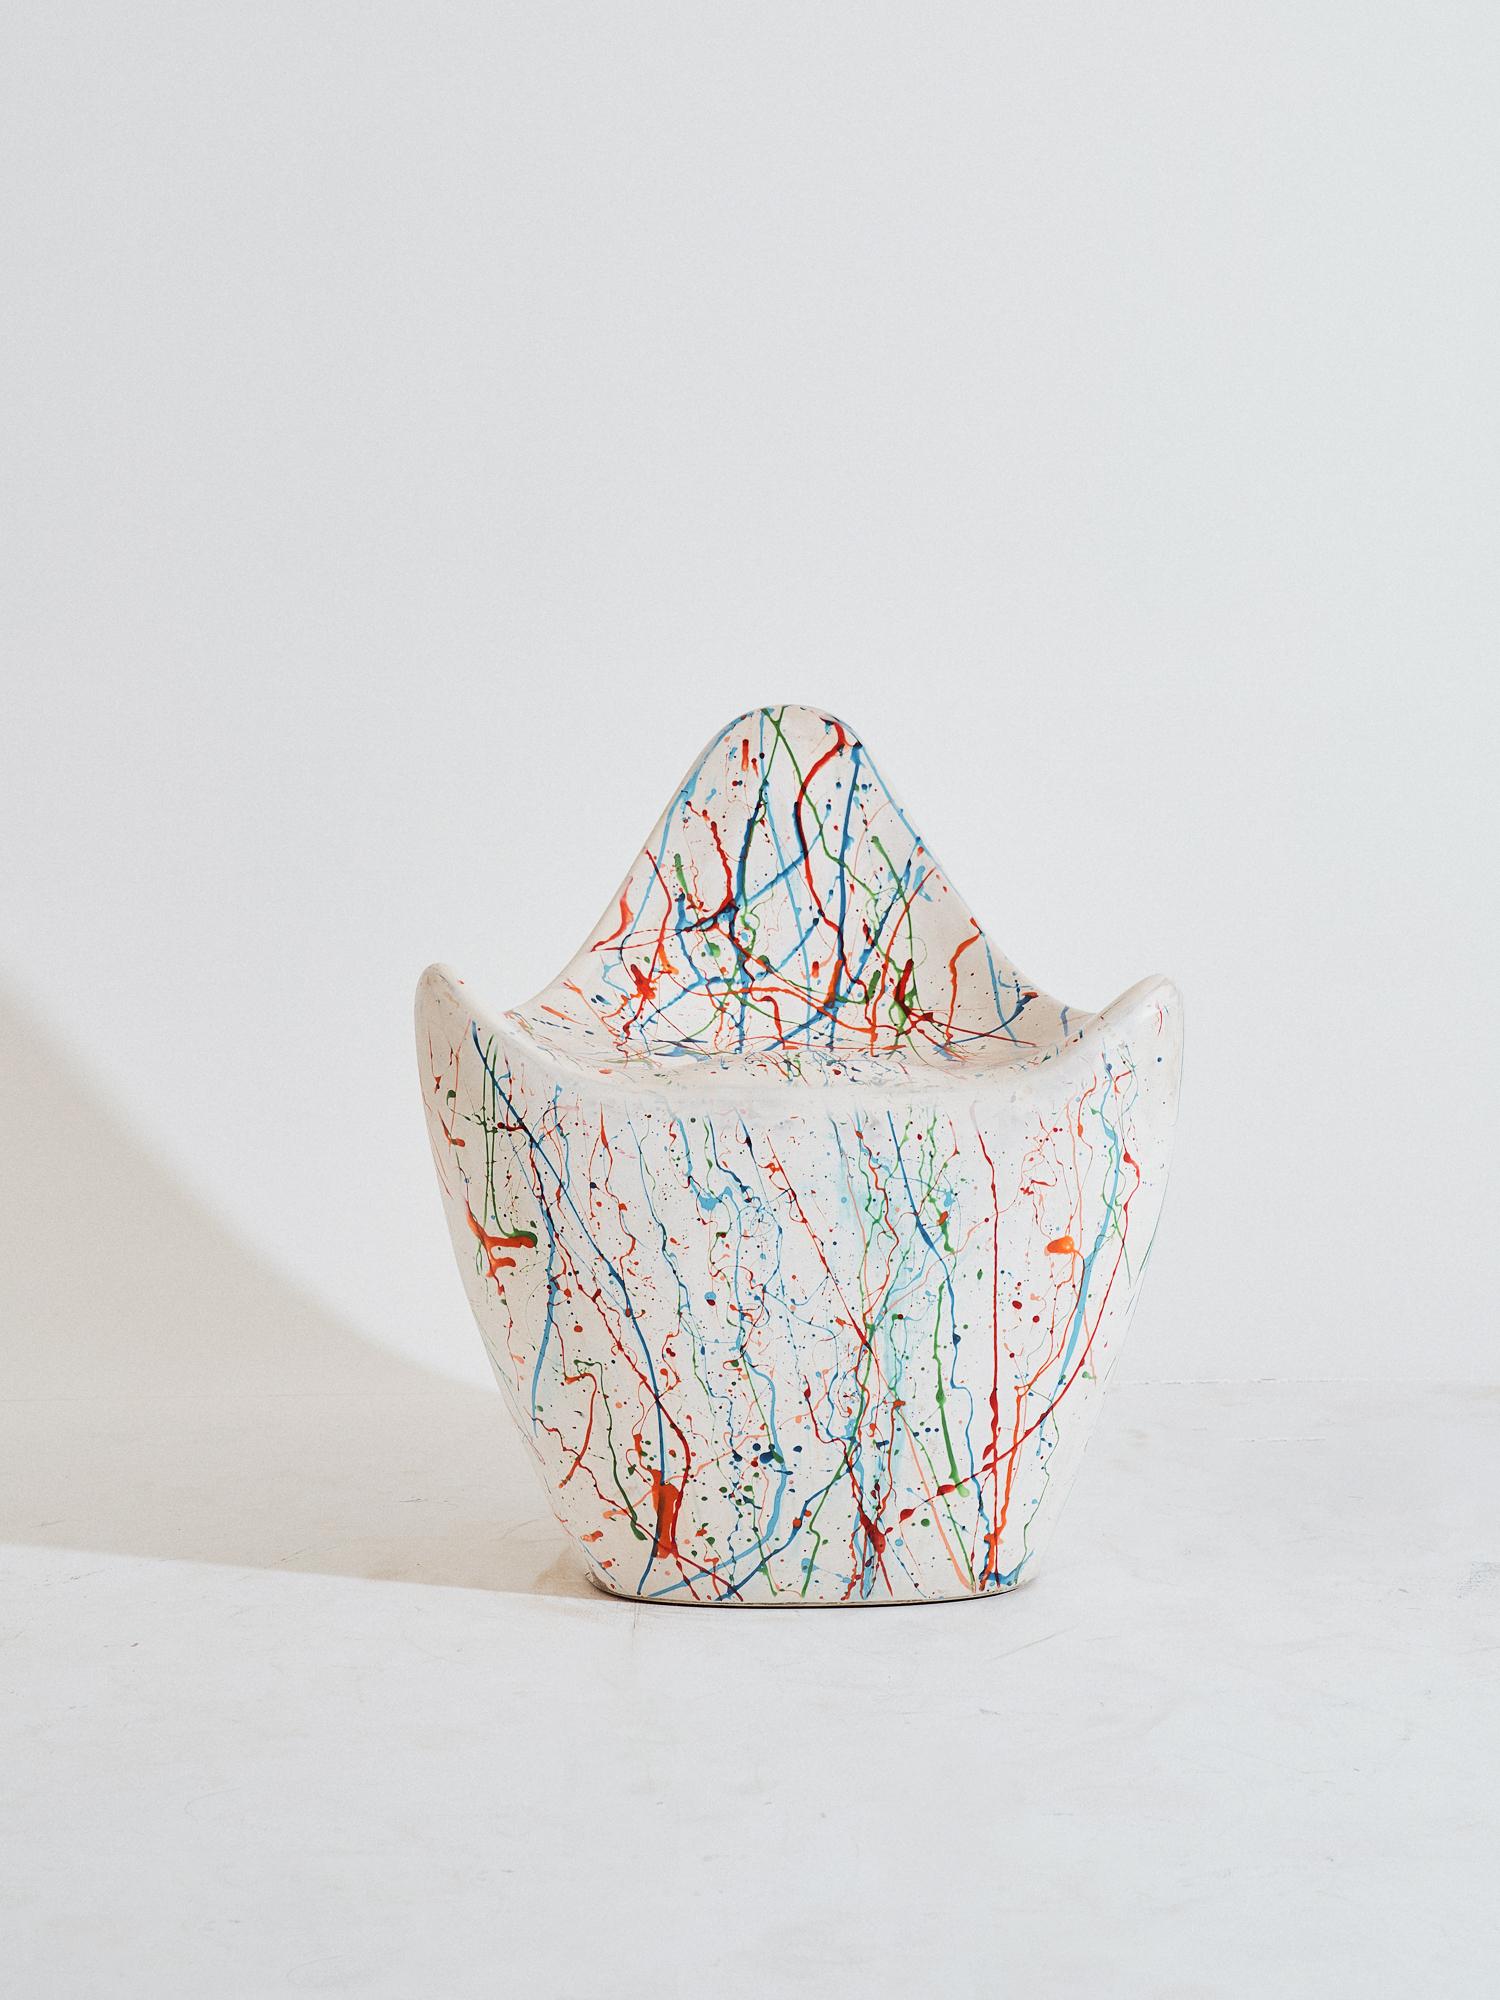 Sculptural Rainbow Cast Fiberglass Popcorn Chair Contemporary, hand sculpted fiberglass chair by Kunaal Kyhaan. The sensual form, is cast in a sculpted Rainbow finish, organically created using dyes during the fiberglass casting process. Layers of